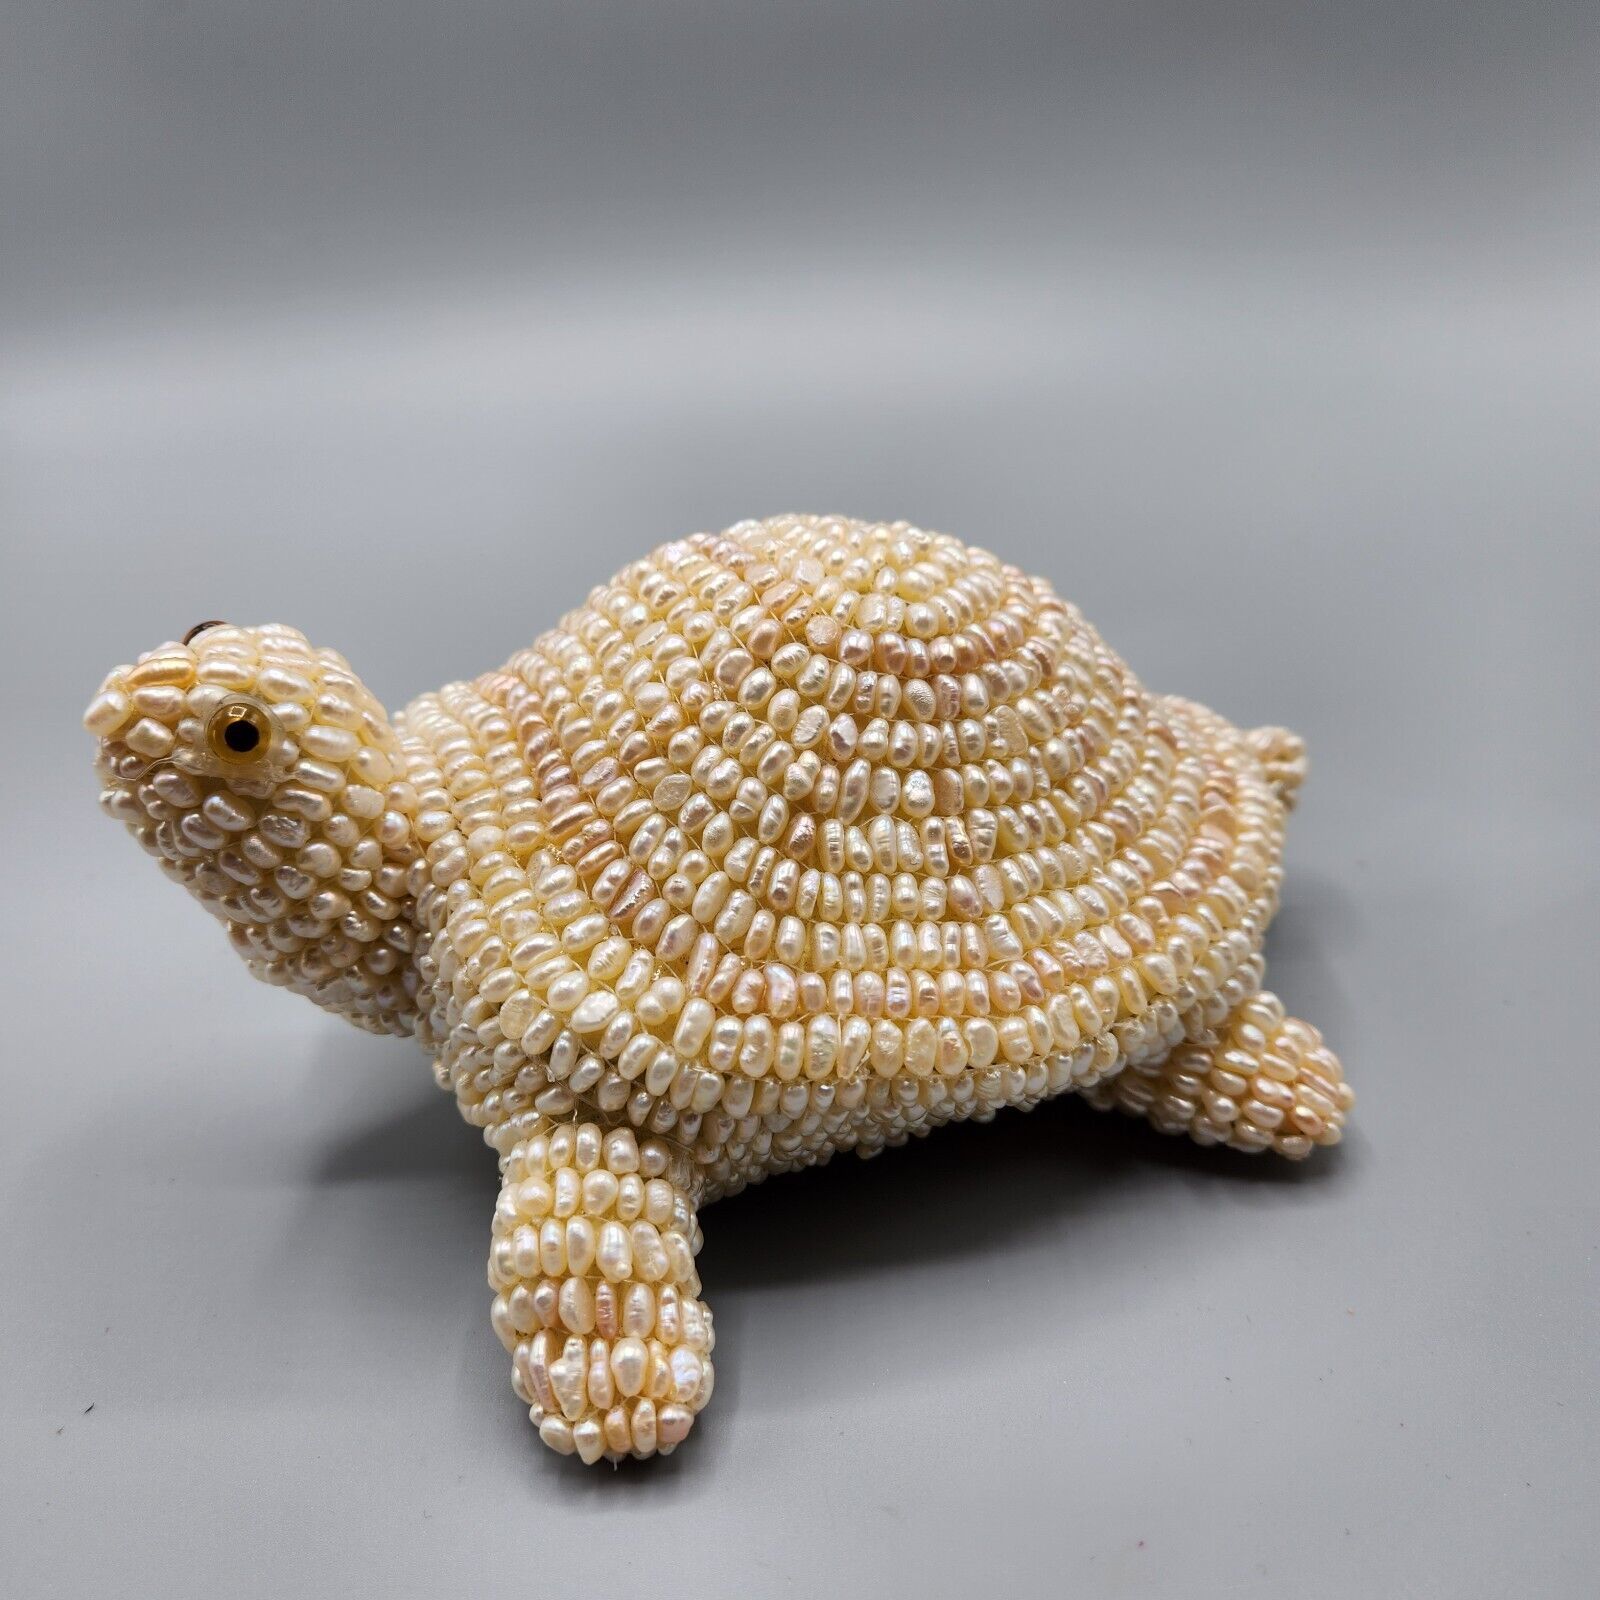 Primary image for Natural Pearl Encrusted Turtle Statuette Figurine Glass Eyes Collectible Head Up